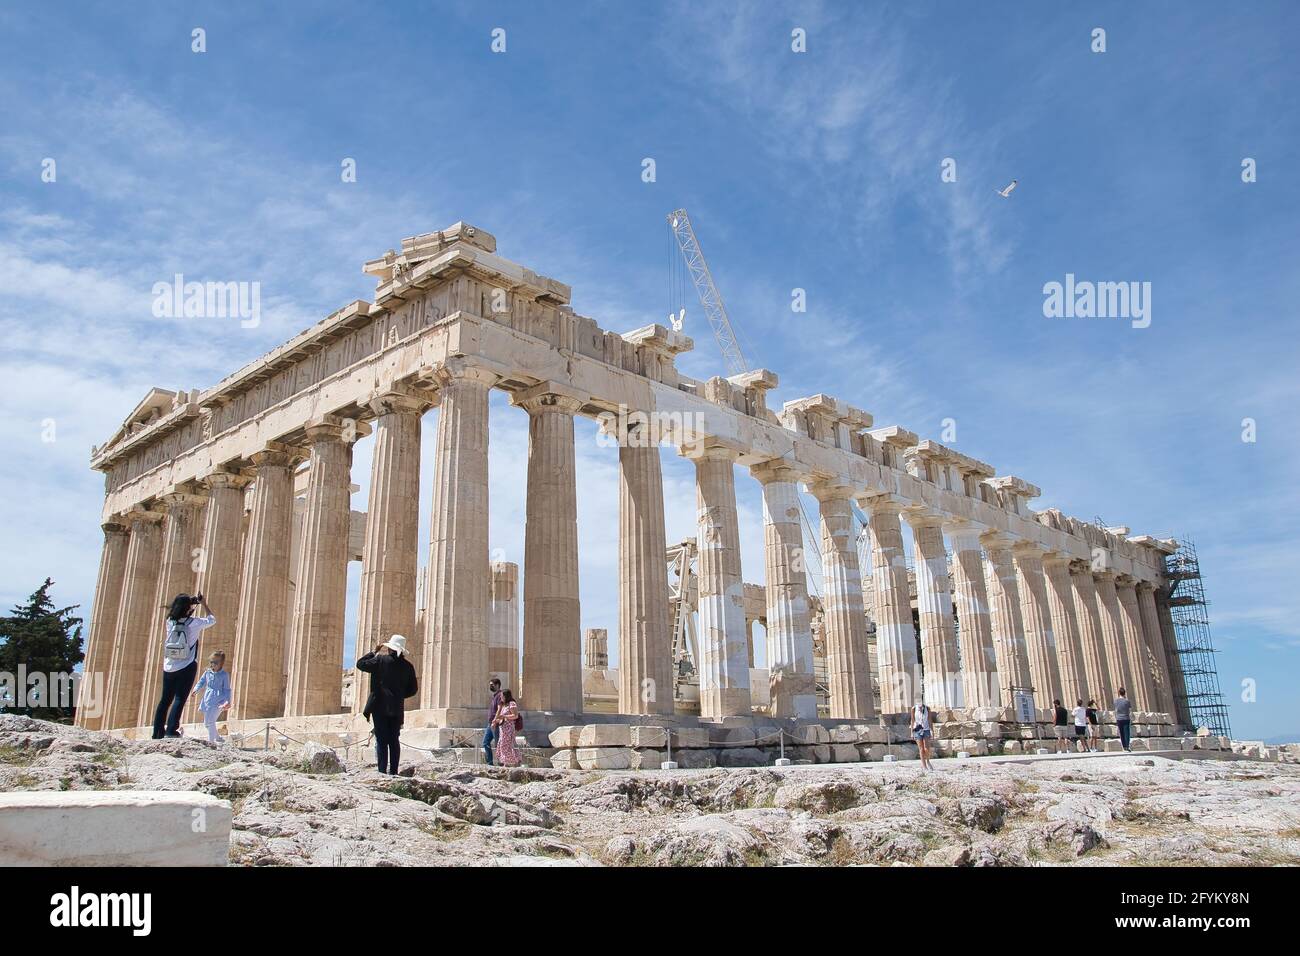 ATHENS, GREECE - May 18, 2021: Parthenon is a temple of classical Athens, in the Athenian Acropolis of Greece, dedicated to the goddess Athena. Athens Stock Photo